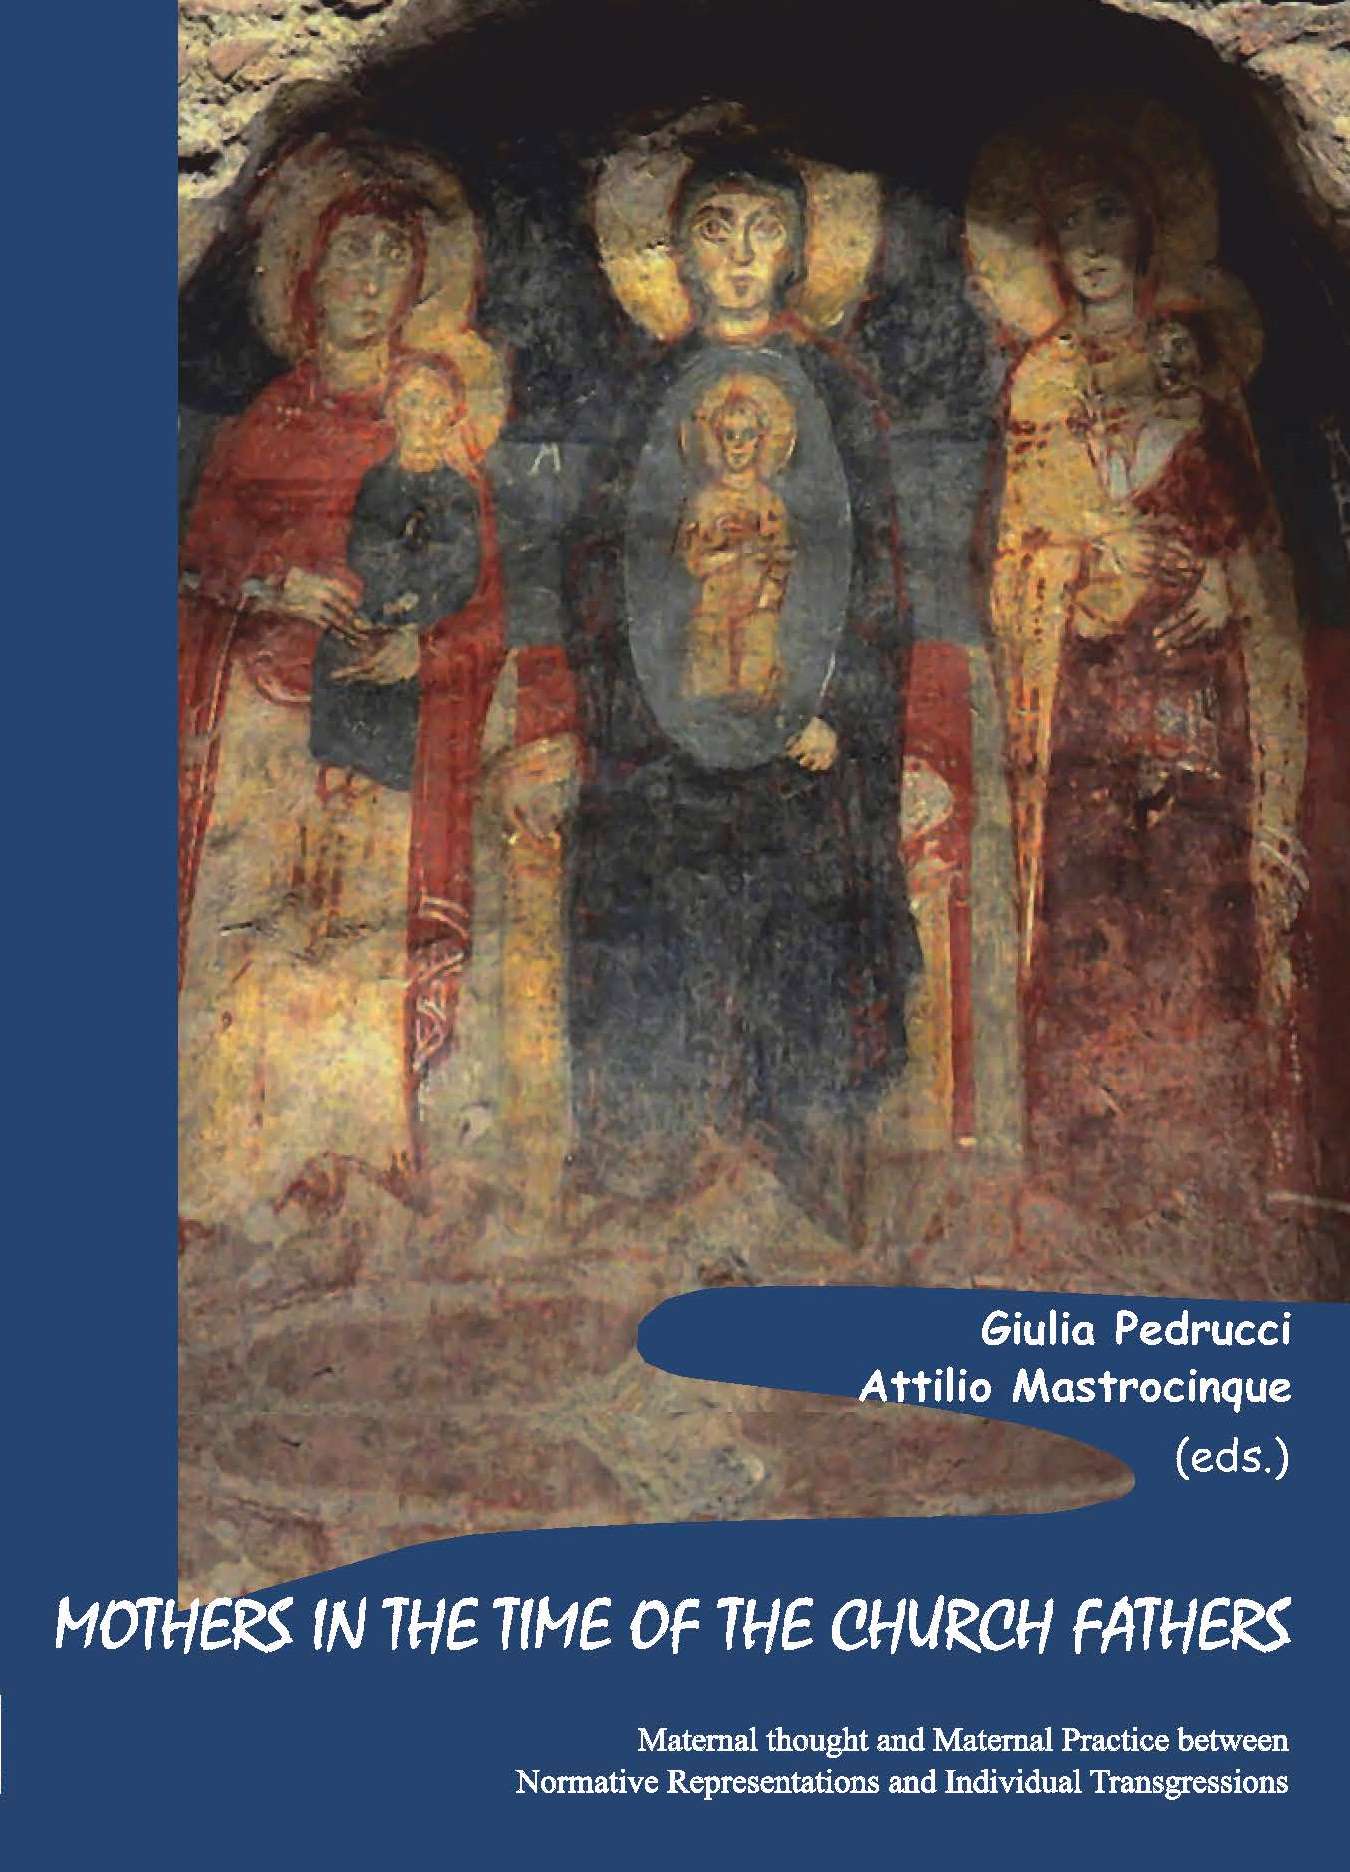 MOTHERS IN THE TIME OF THE CHURCH FATHERS: MATERNAL THOUGHT AND MATERNAL PRACTICE BETWEEN NORMATIVE REPRESENTATIONS AND INDIVIDUAL TRANSGRESSIONS<br/>

International Workshop, University of Verona (Italy), 11 February 2022 - Sacra publica et privata 13 

